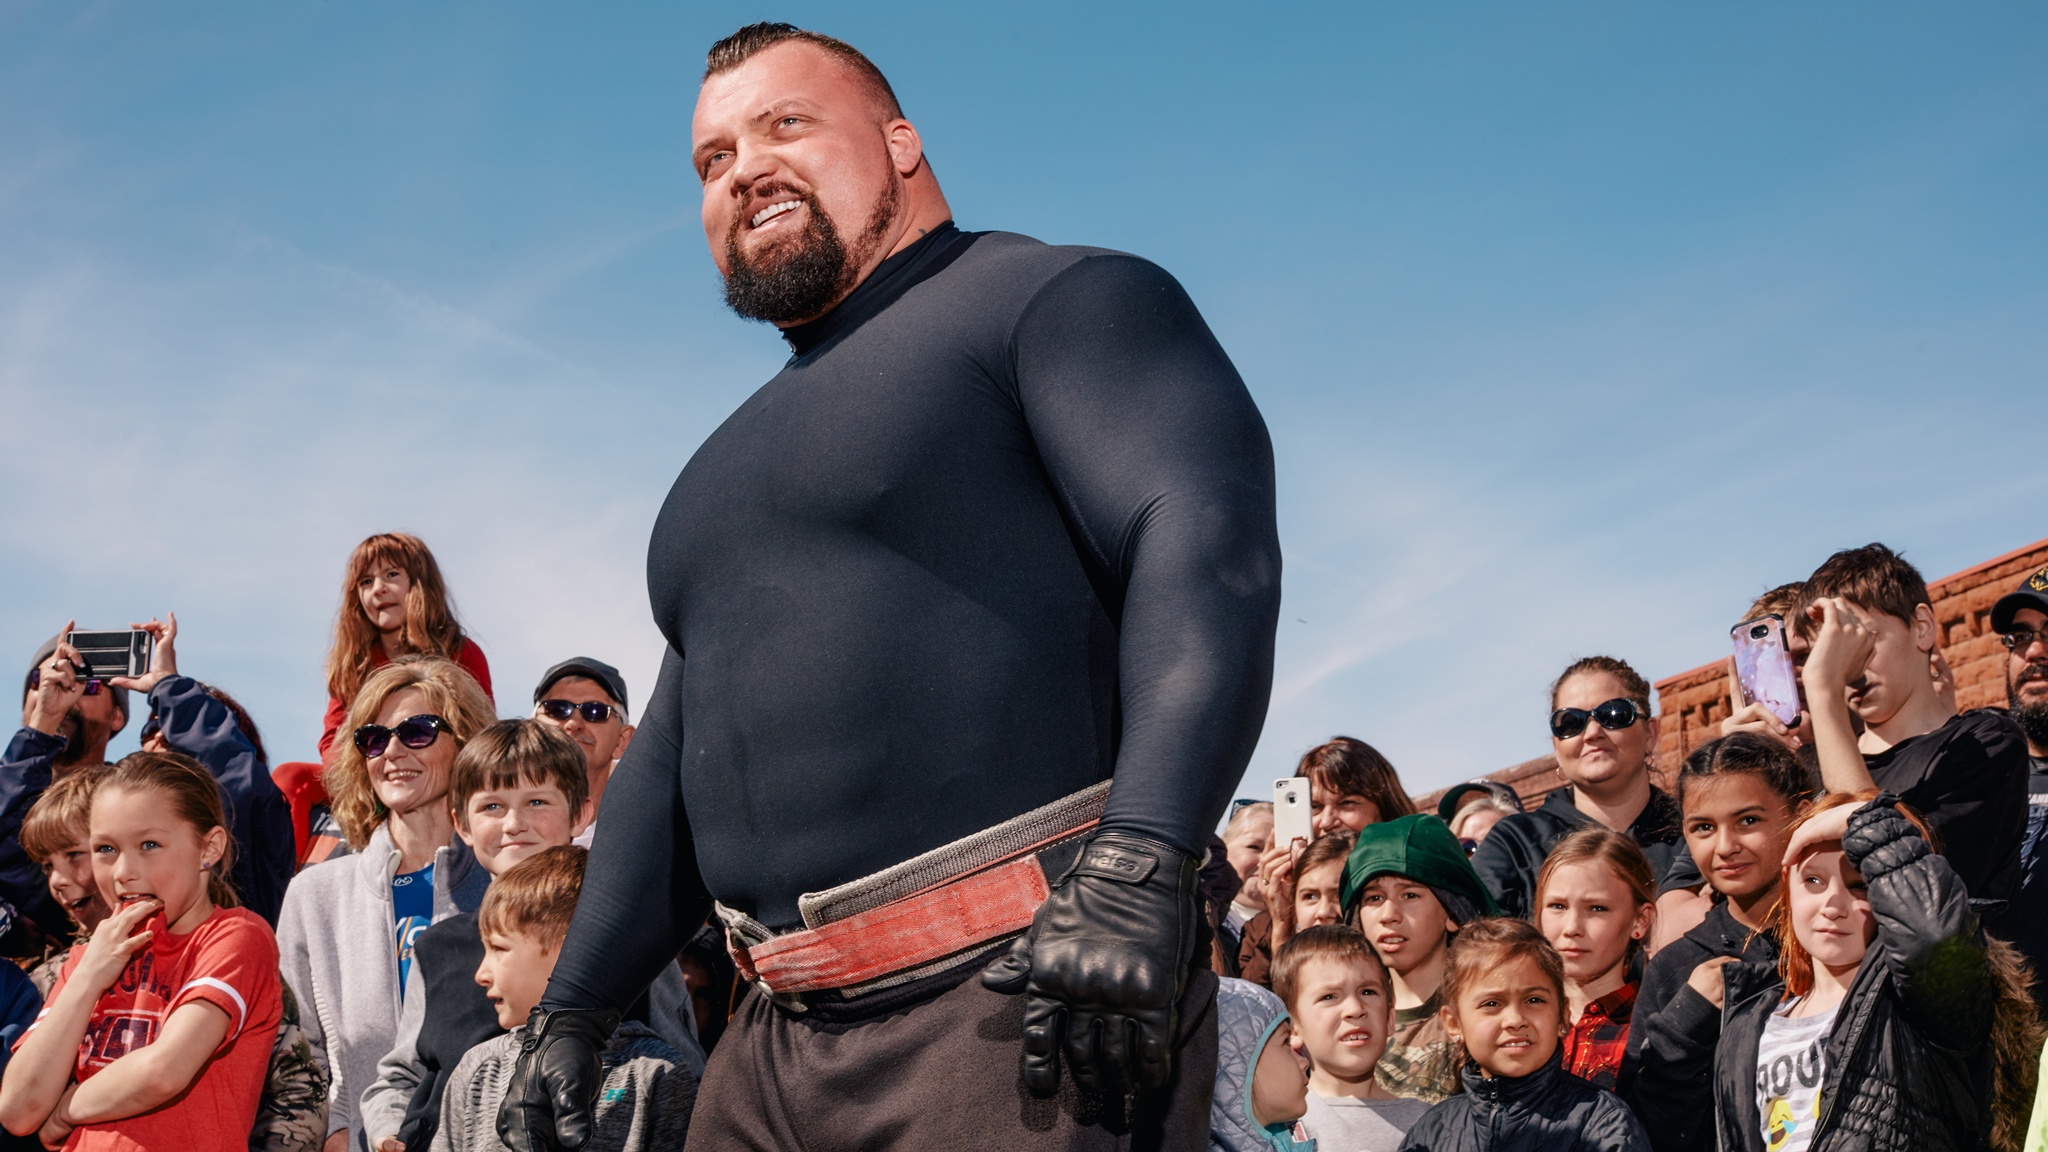 Eddie Hall's wife reveals what it's really like living The Beast